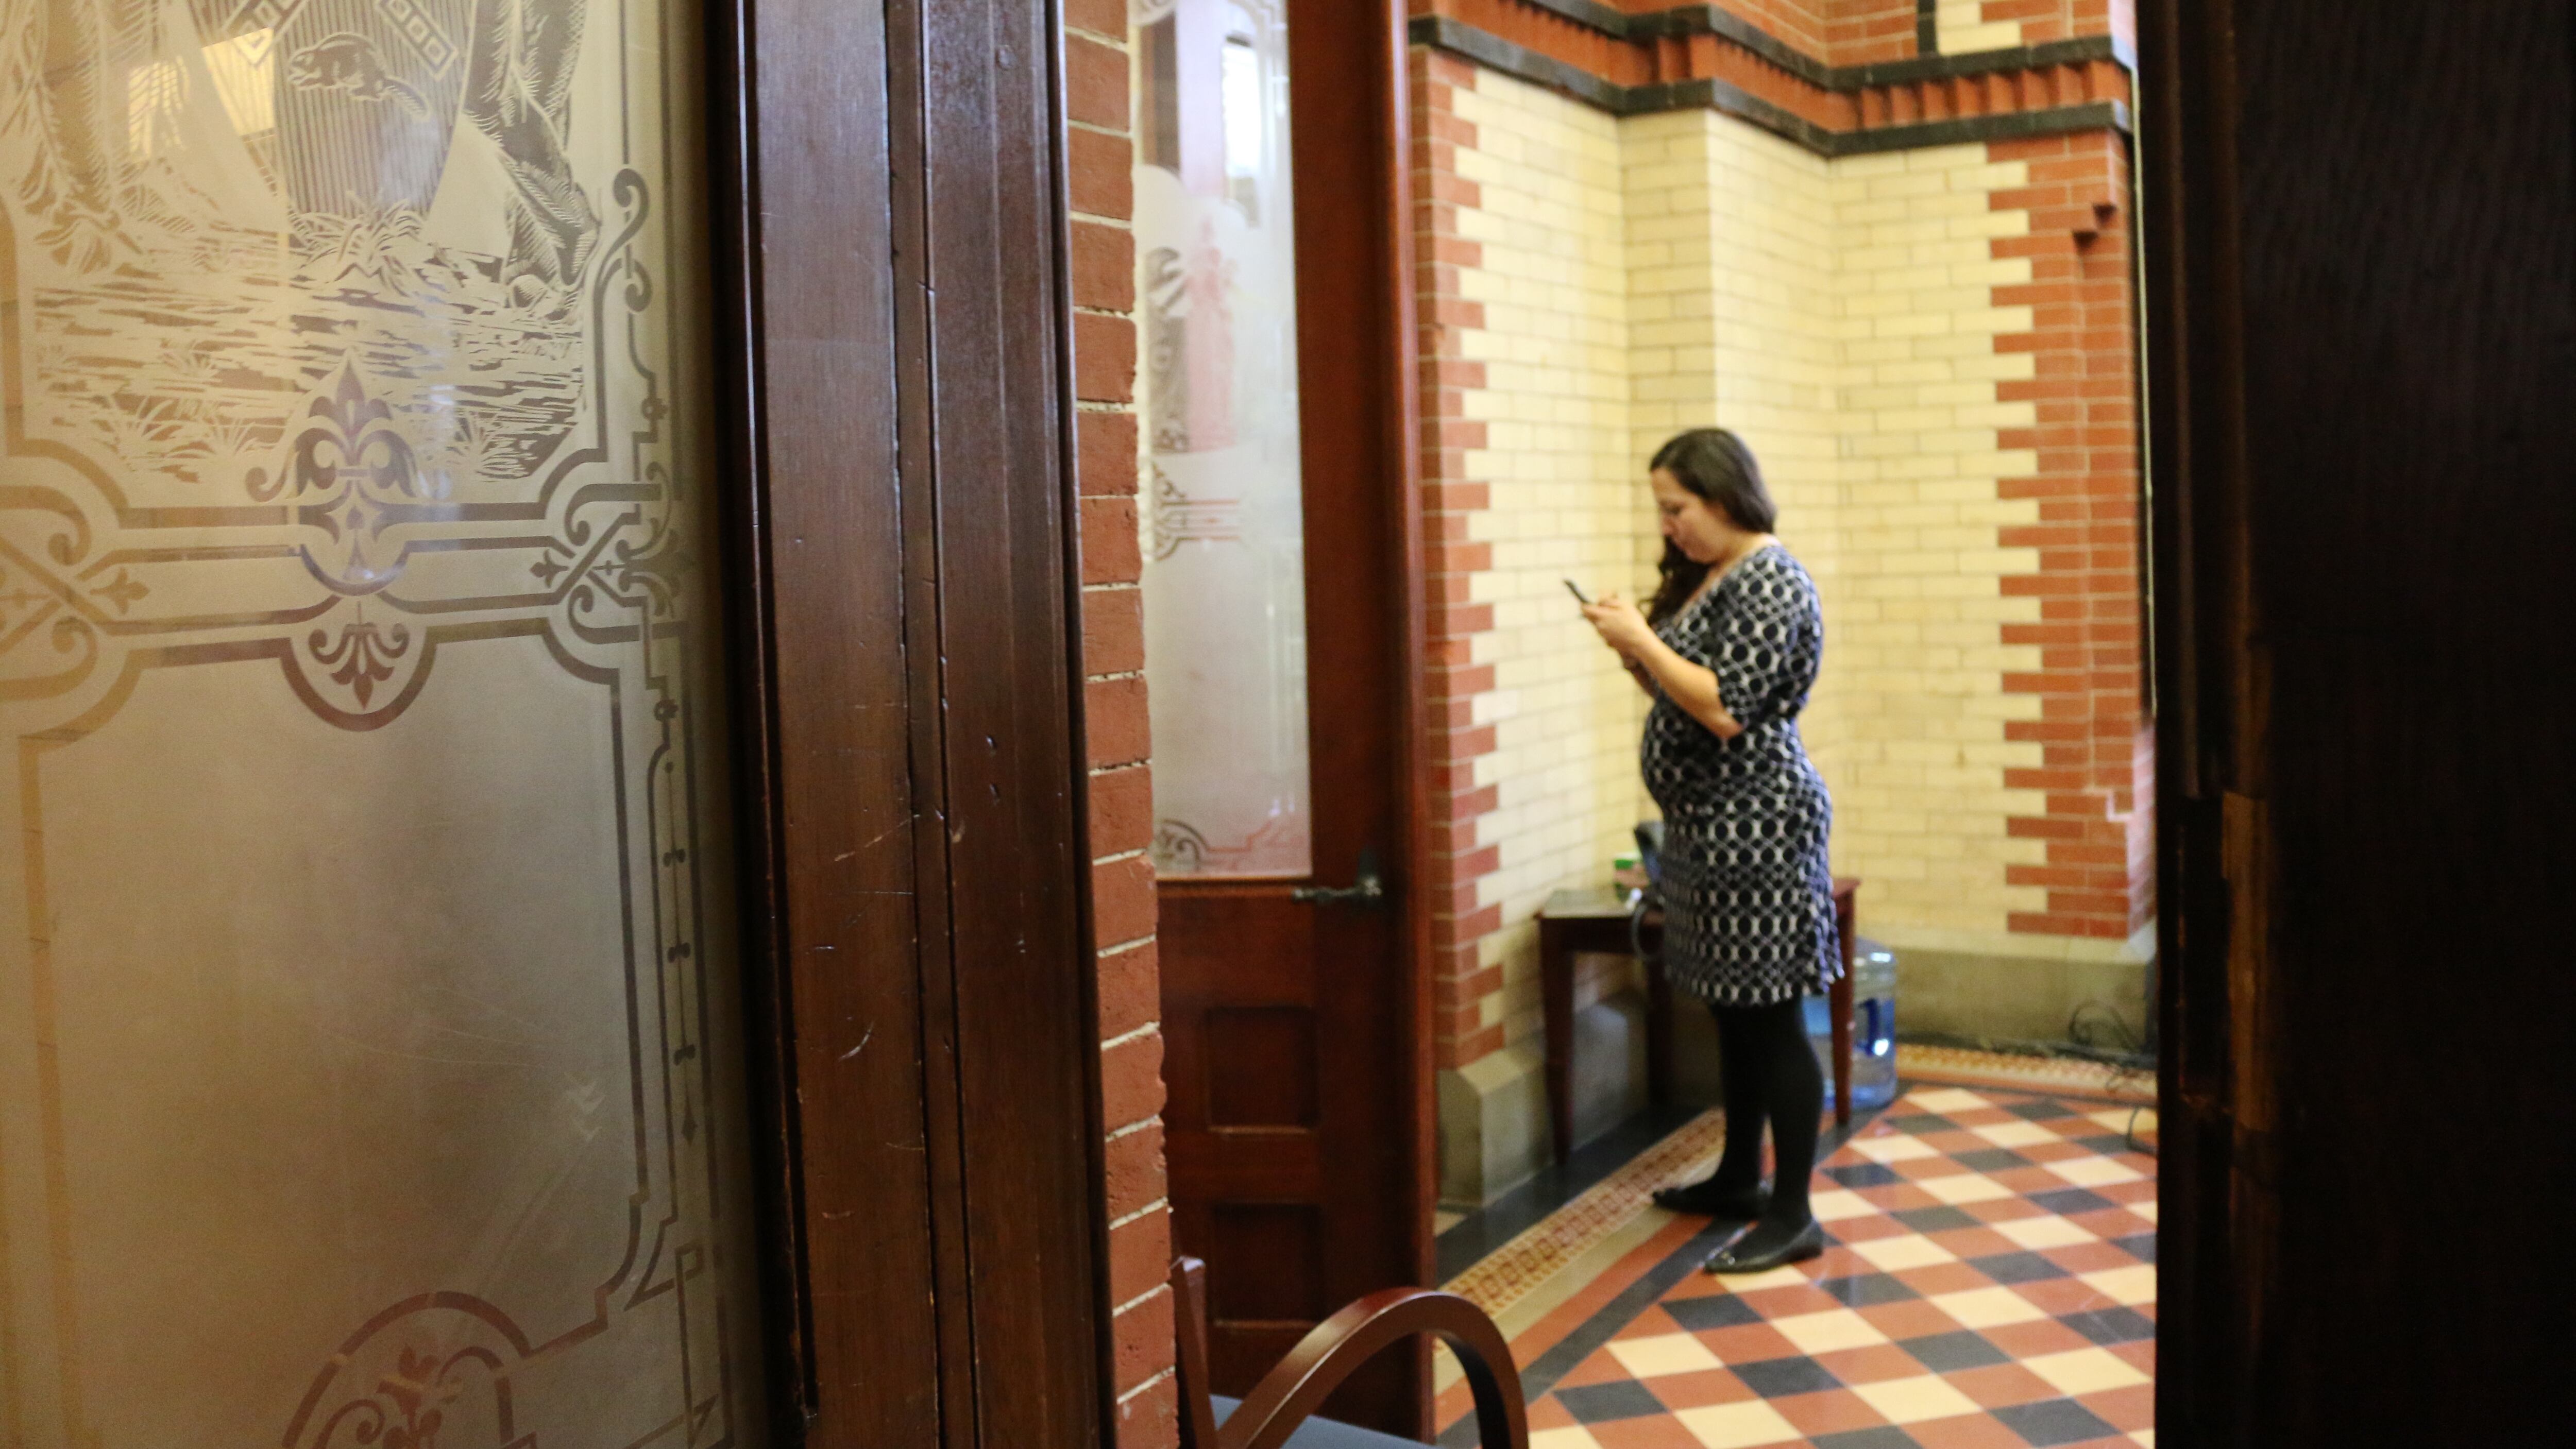 The chancellor’s Chief of Staff, Ursulina Ramirez, lingered in Carmen Fariña’s empty office after the chancellor left the education department headquarters.